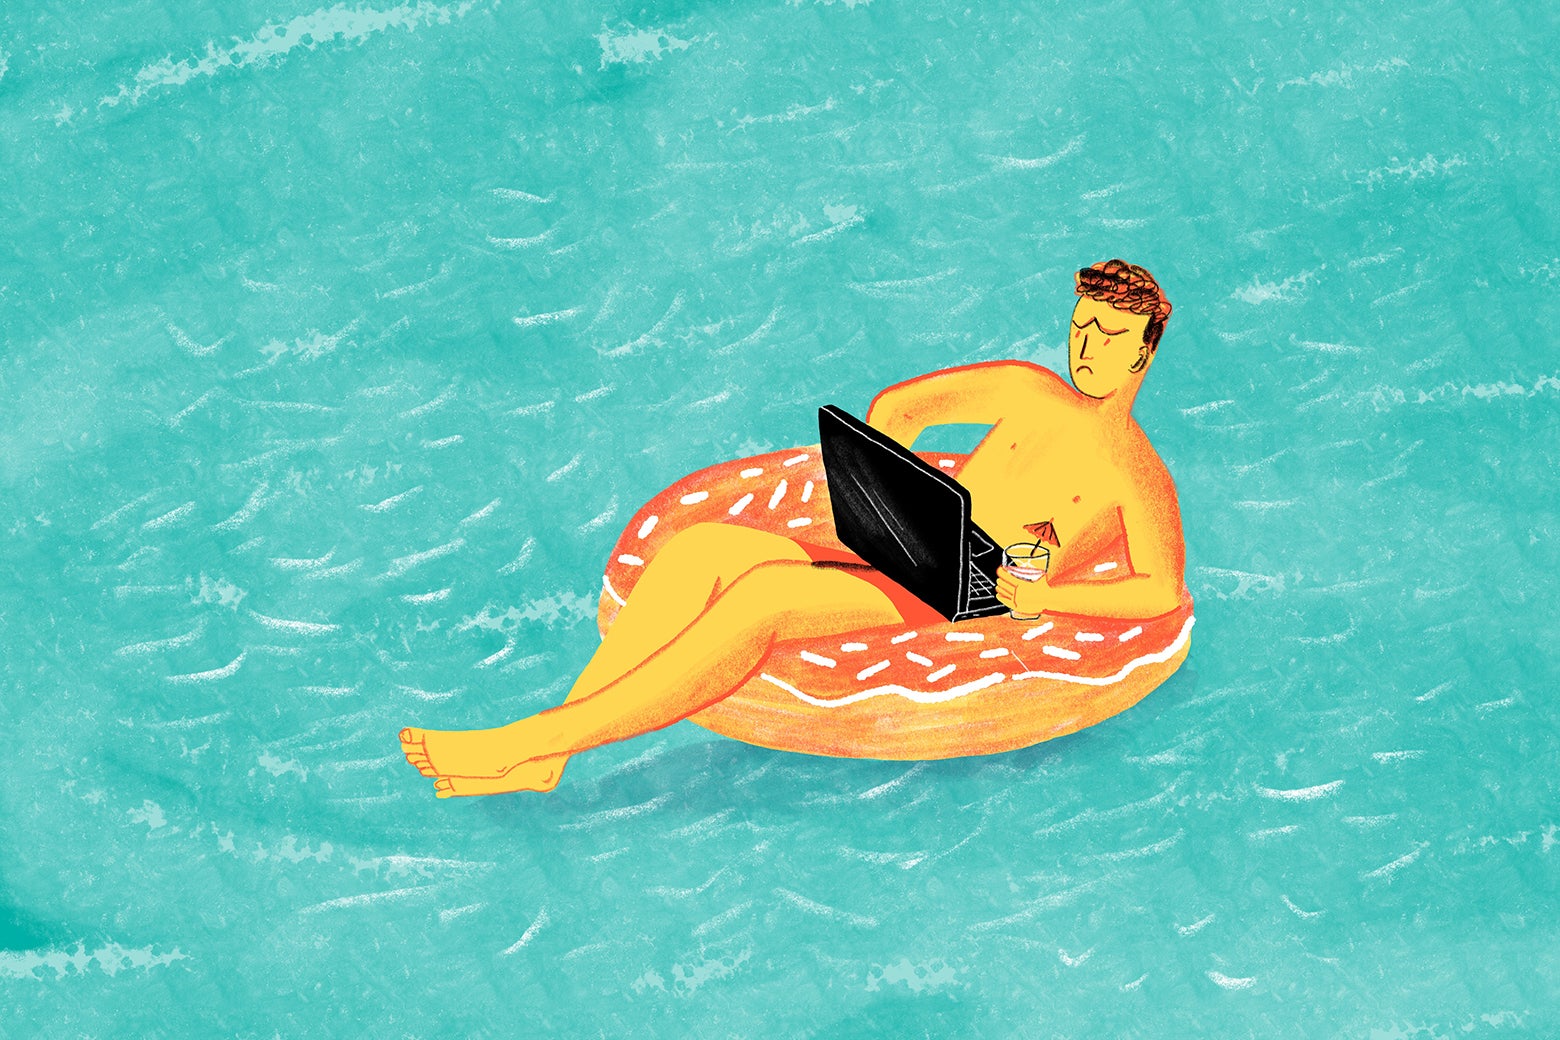 An illustration of a disgruntled office worker on workcation, sitting on a floatie in pool and balancing a laptop on their lap.